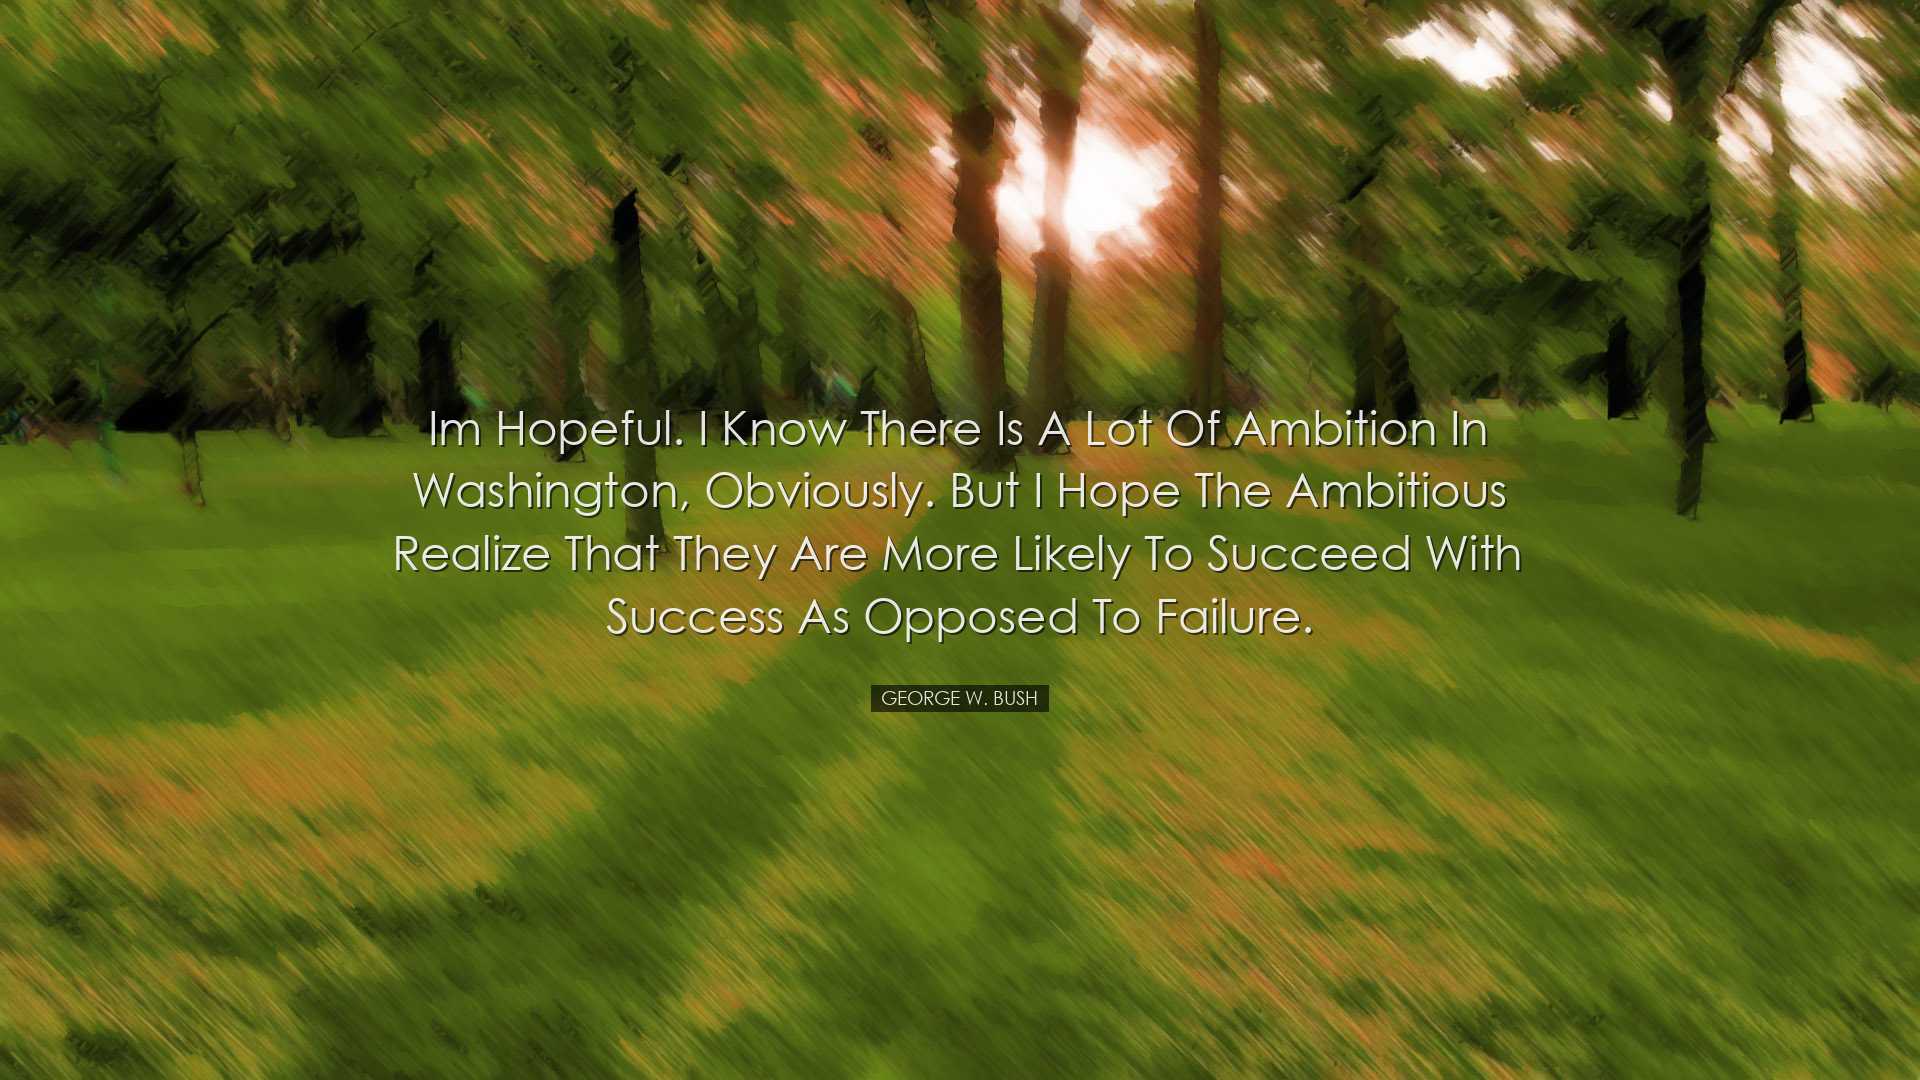 Im hopeful. I know there is a lot of ambition in Washington, obvio